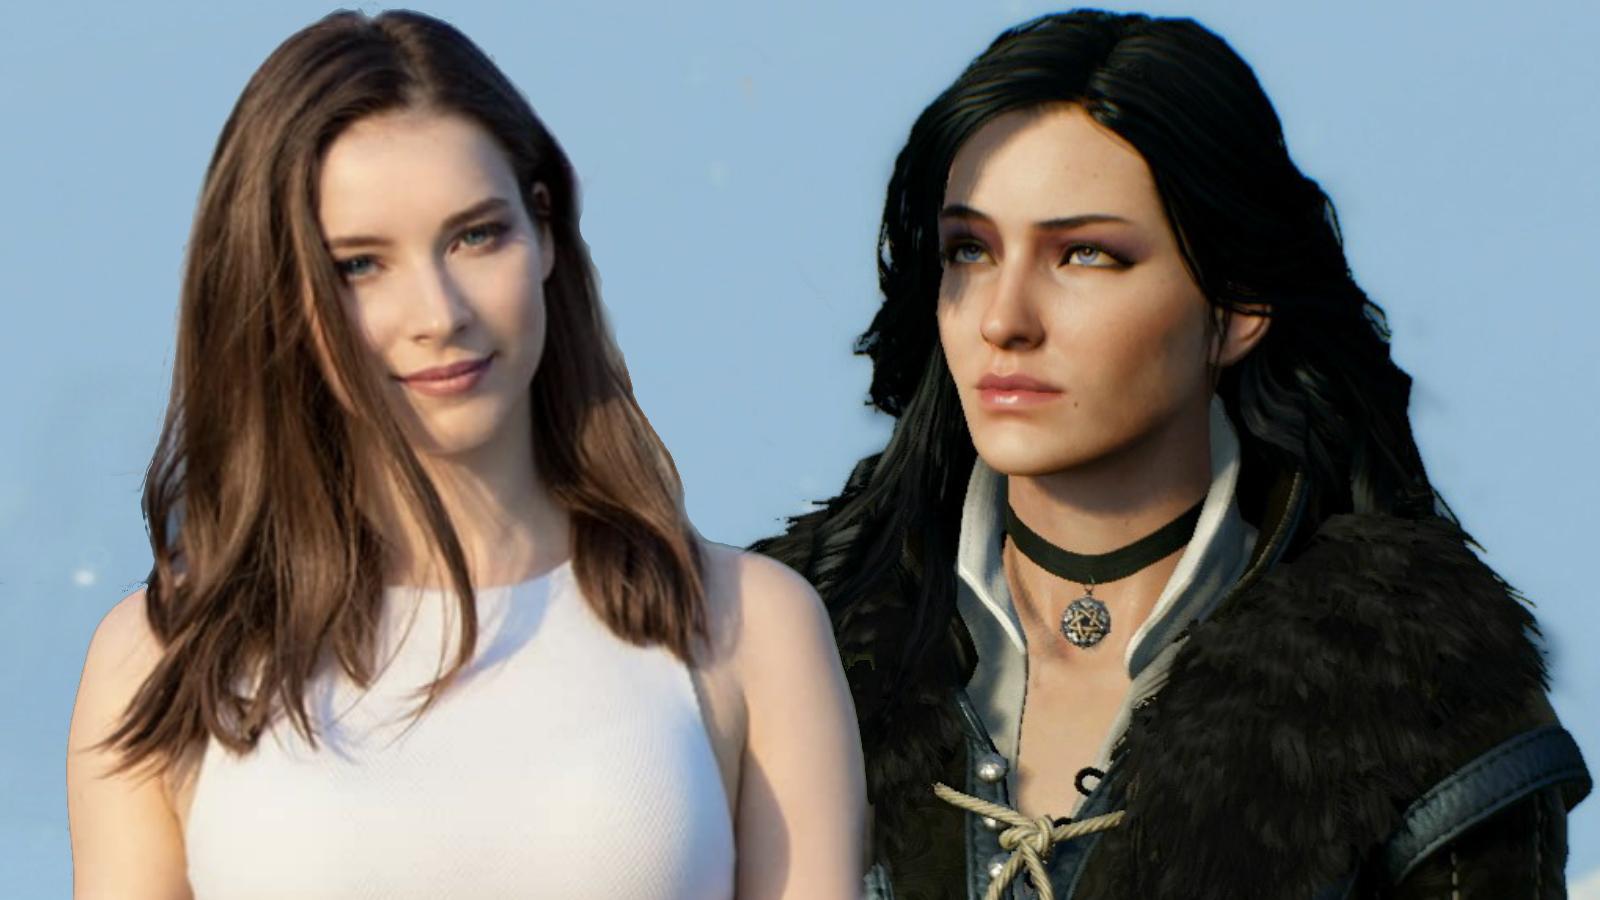 Yennefer of vengerberg the witcher 3 voiced standalone follower фото 51